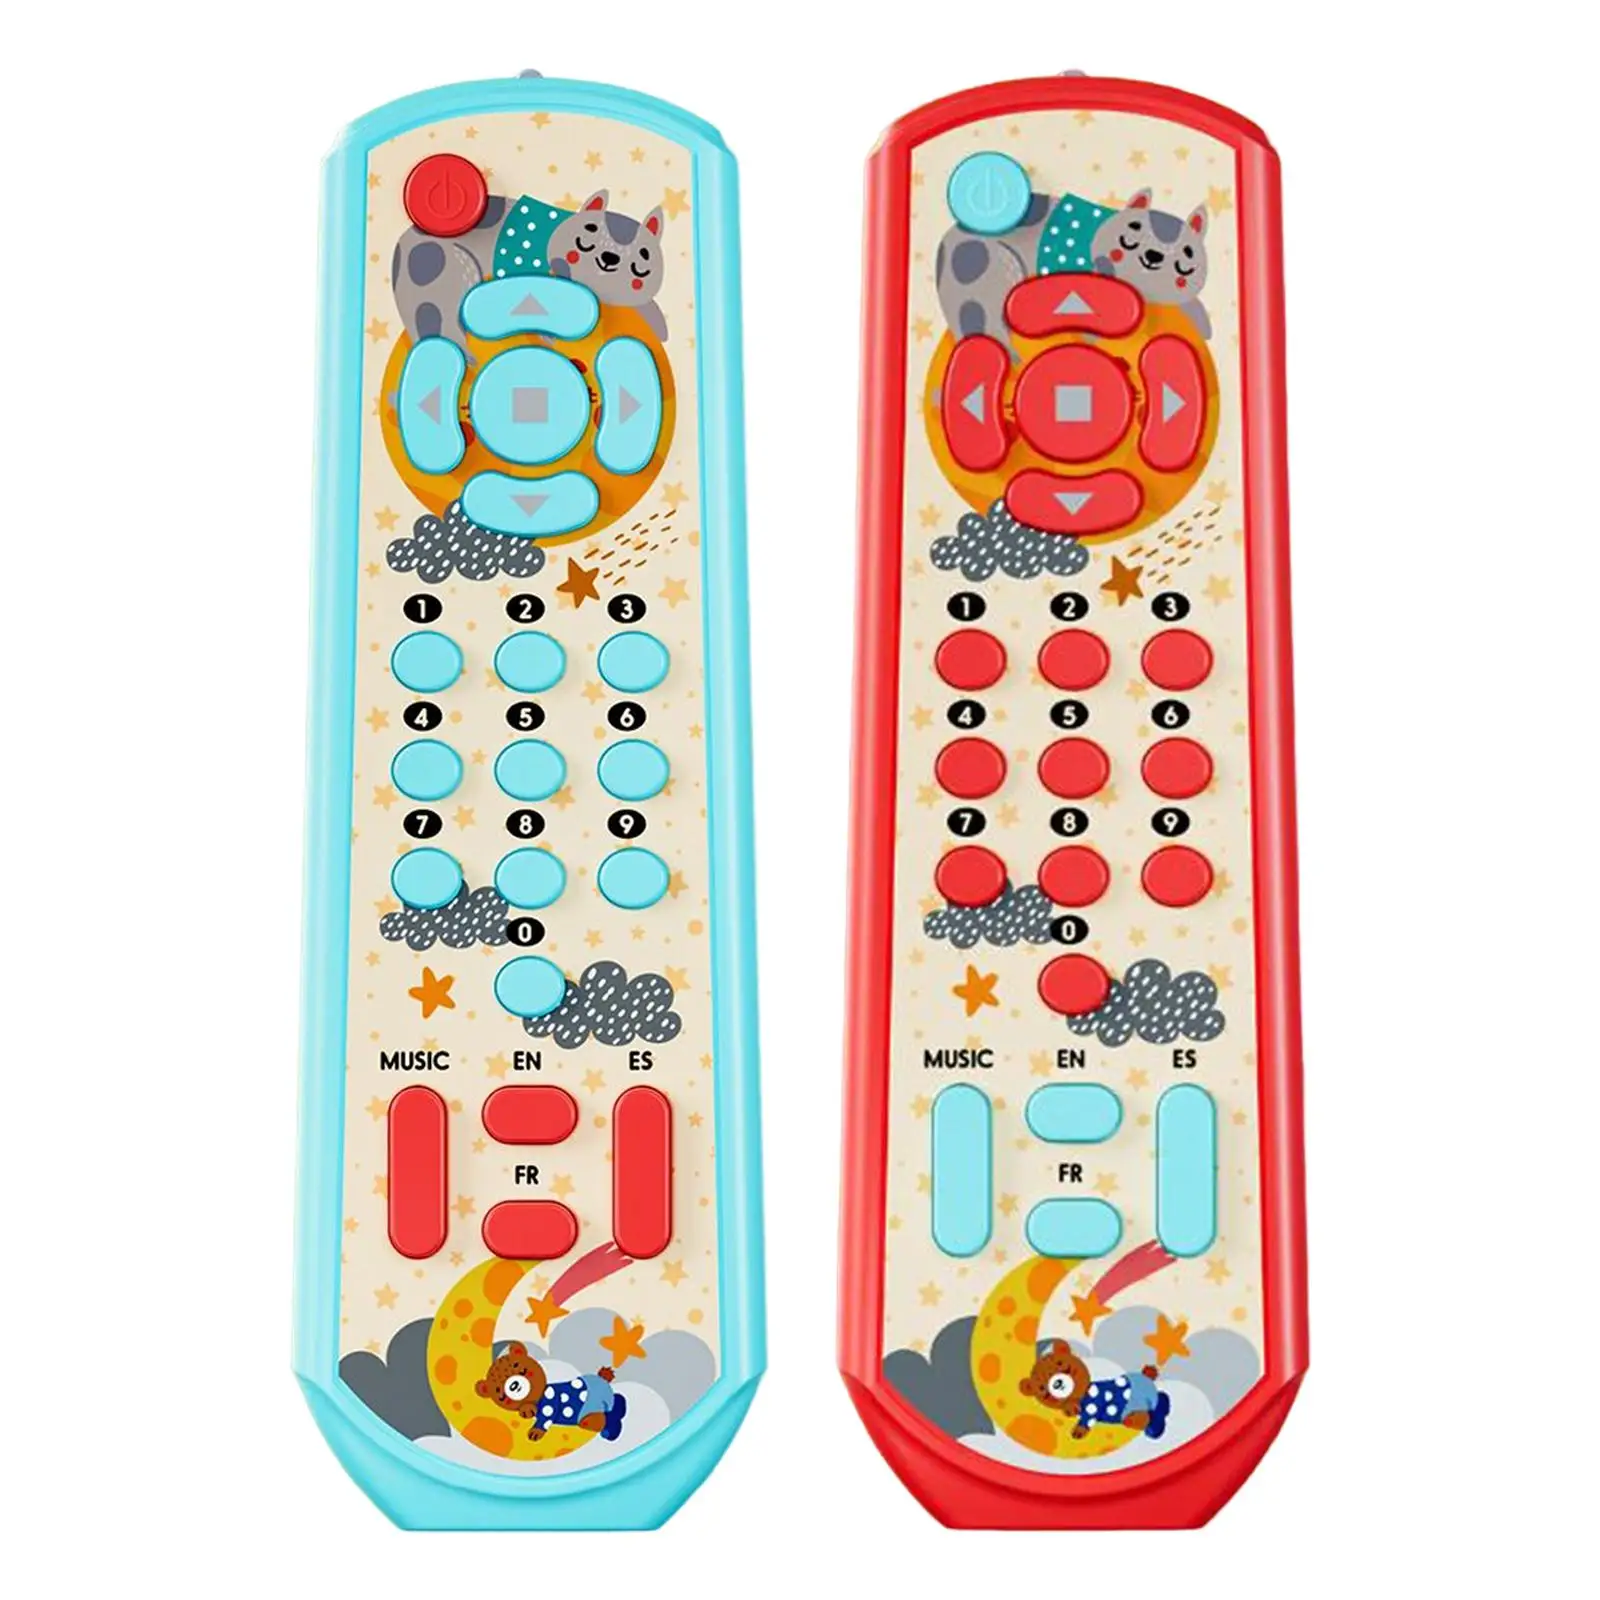 TV Remote Control Toy with Sound Education Toys for Birthday Gifts